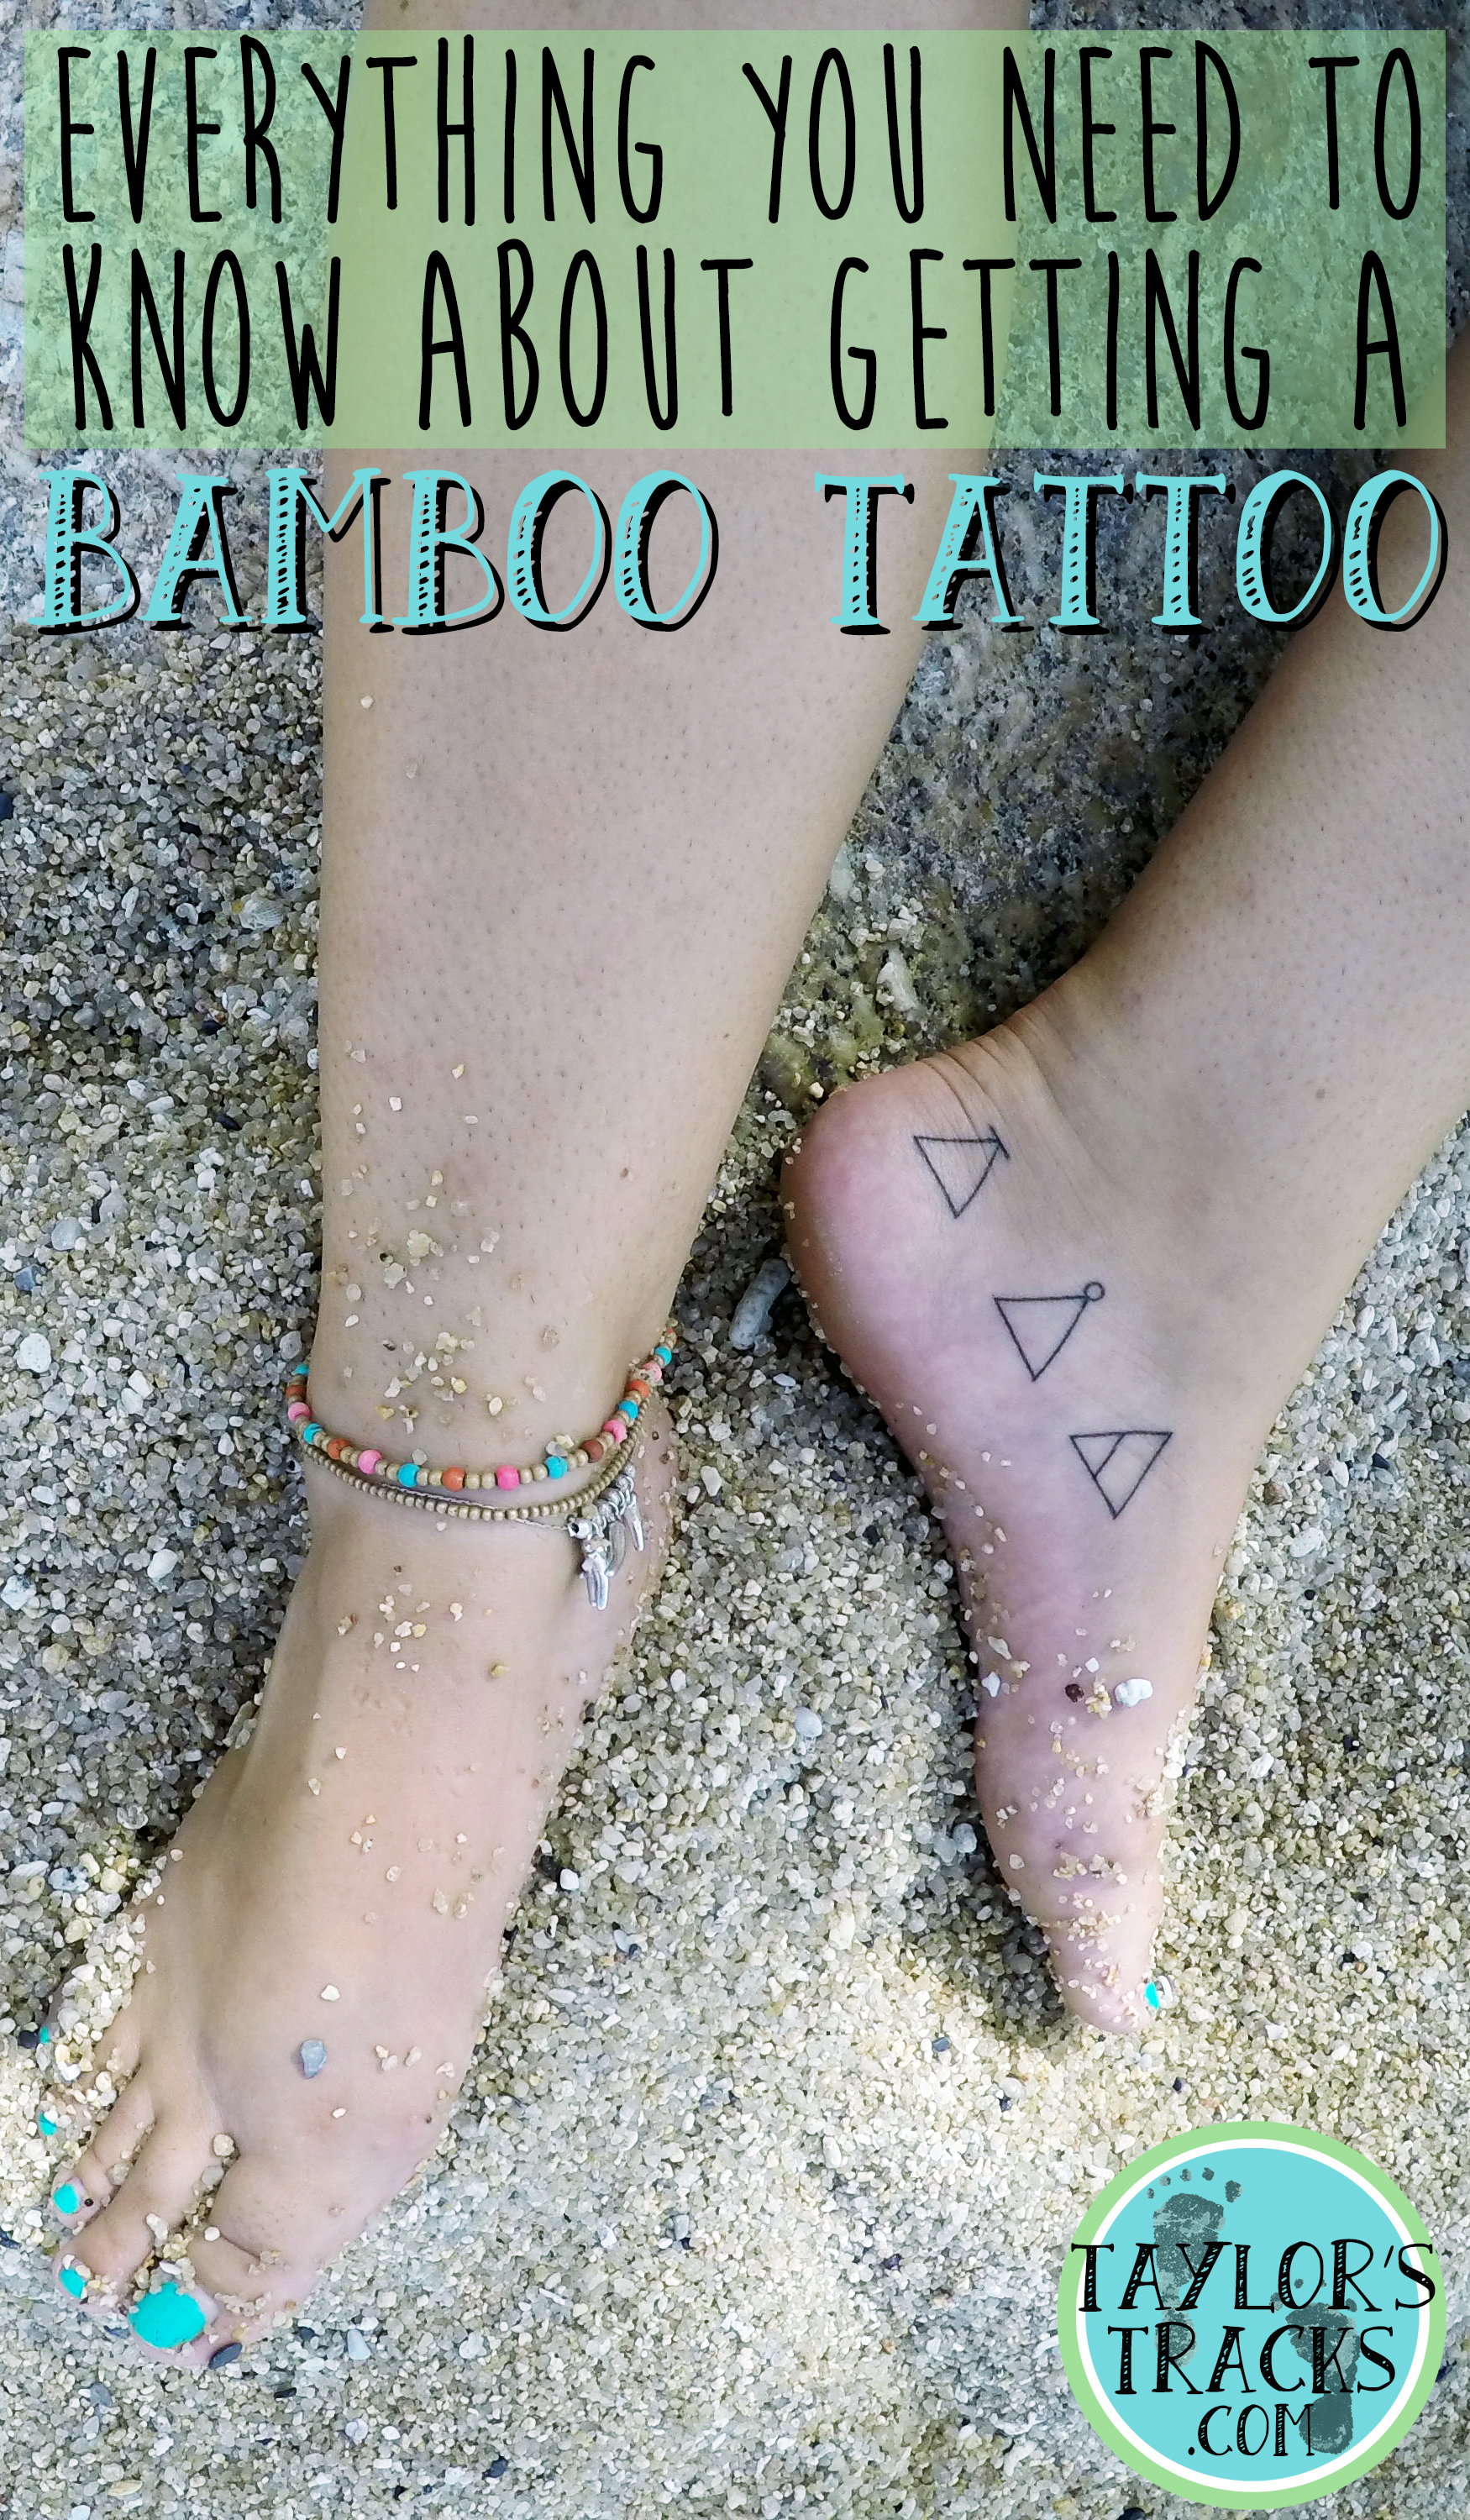 Getting A Bamboo Tattoo In Thailand  Everything You Need To Know